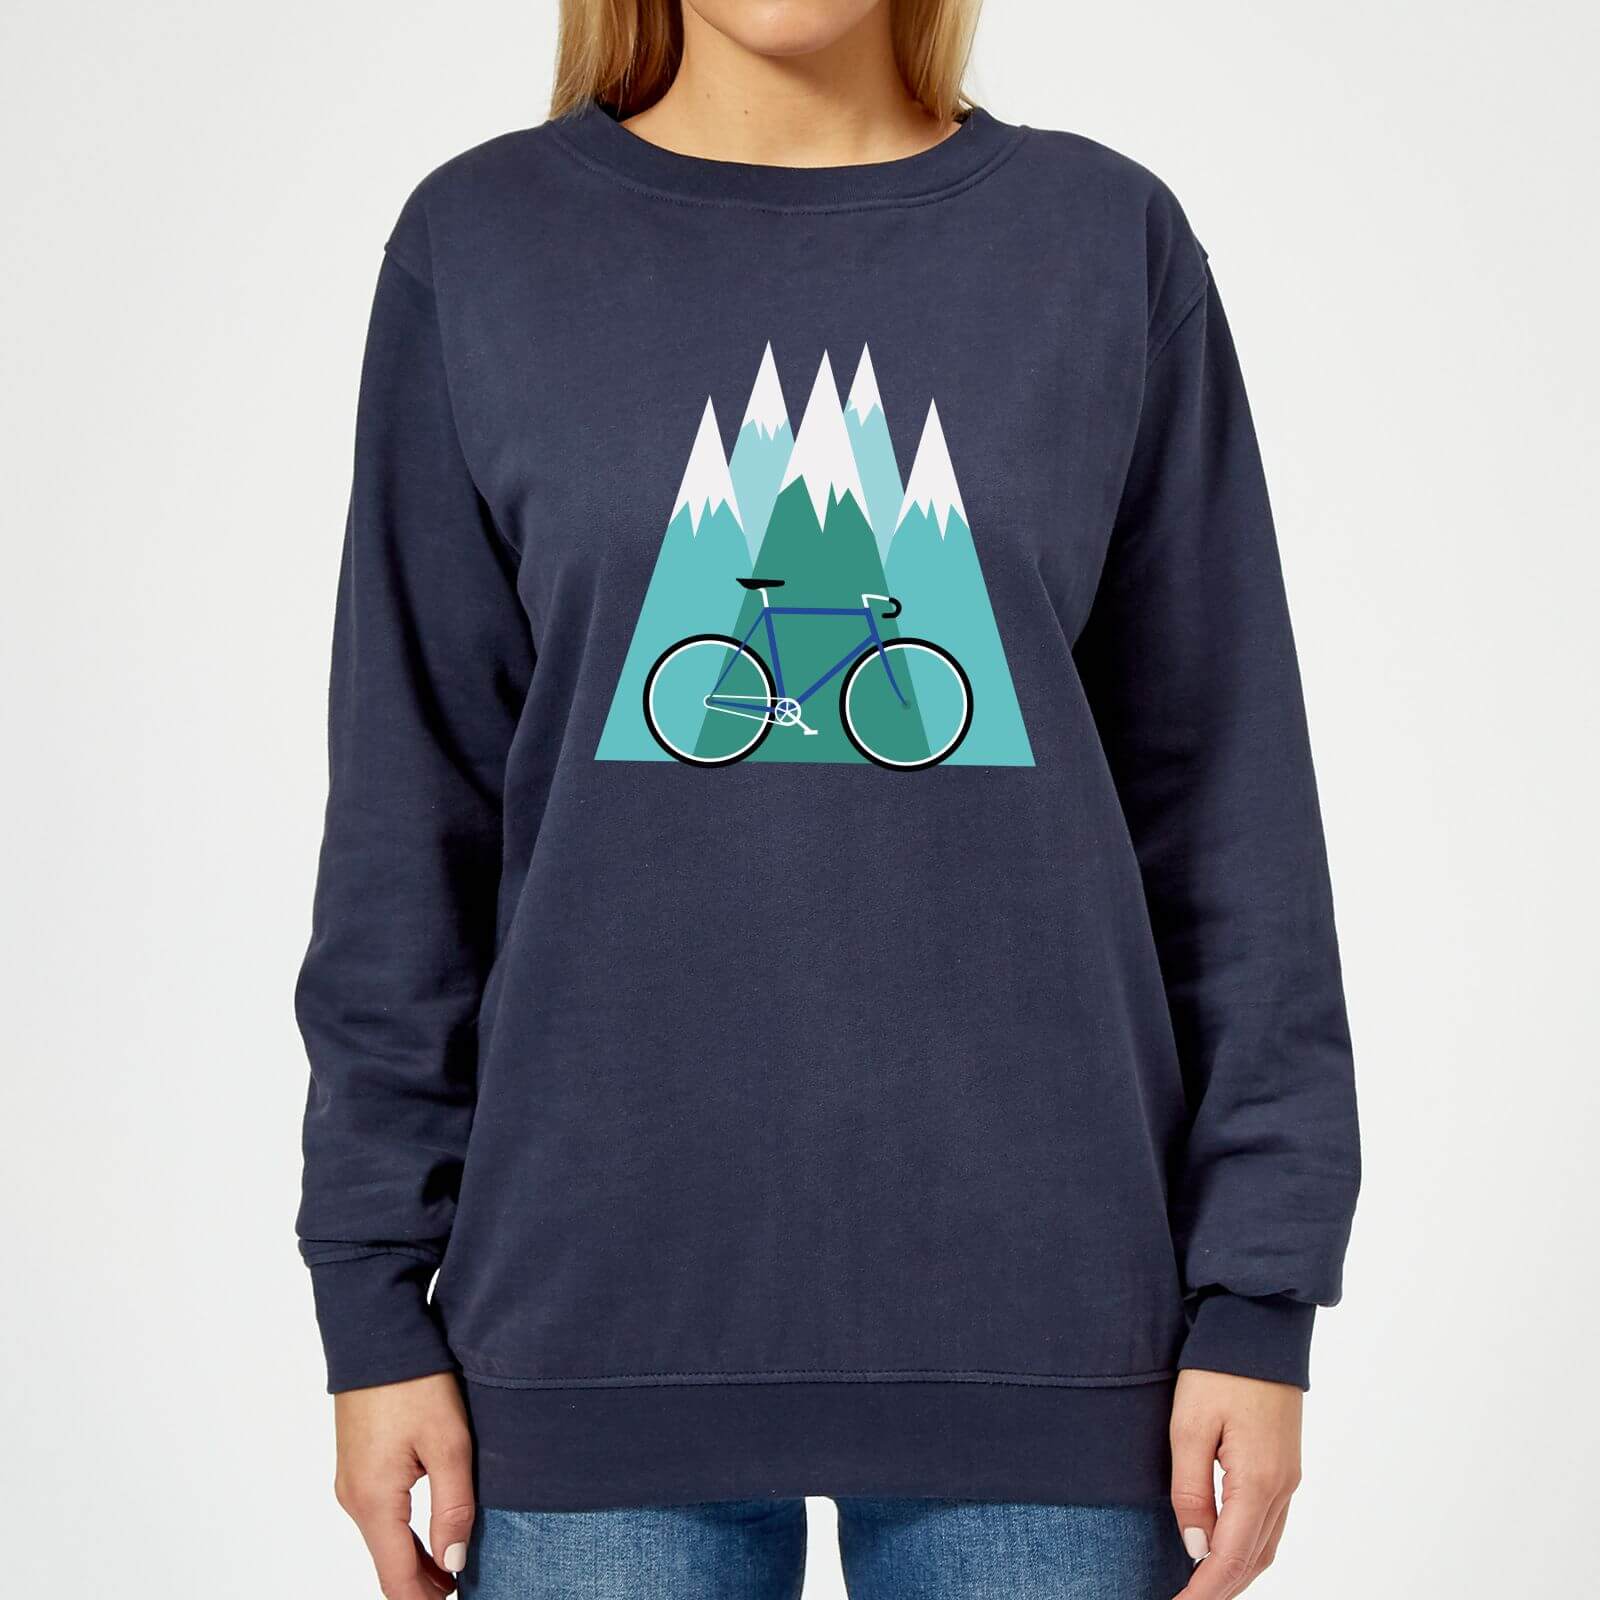 Bike and Mountains Women's Christmas Jumper - Navy - XL - Navy